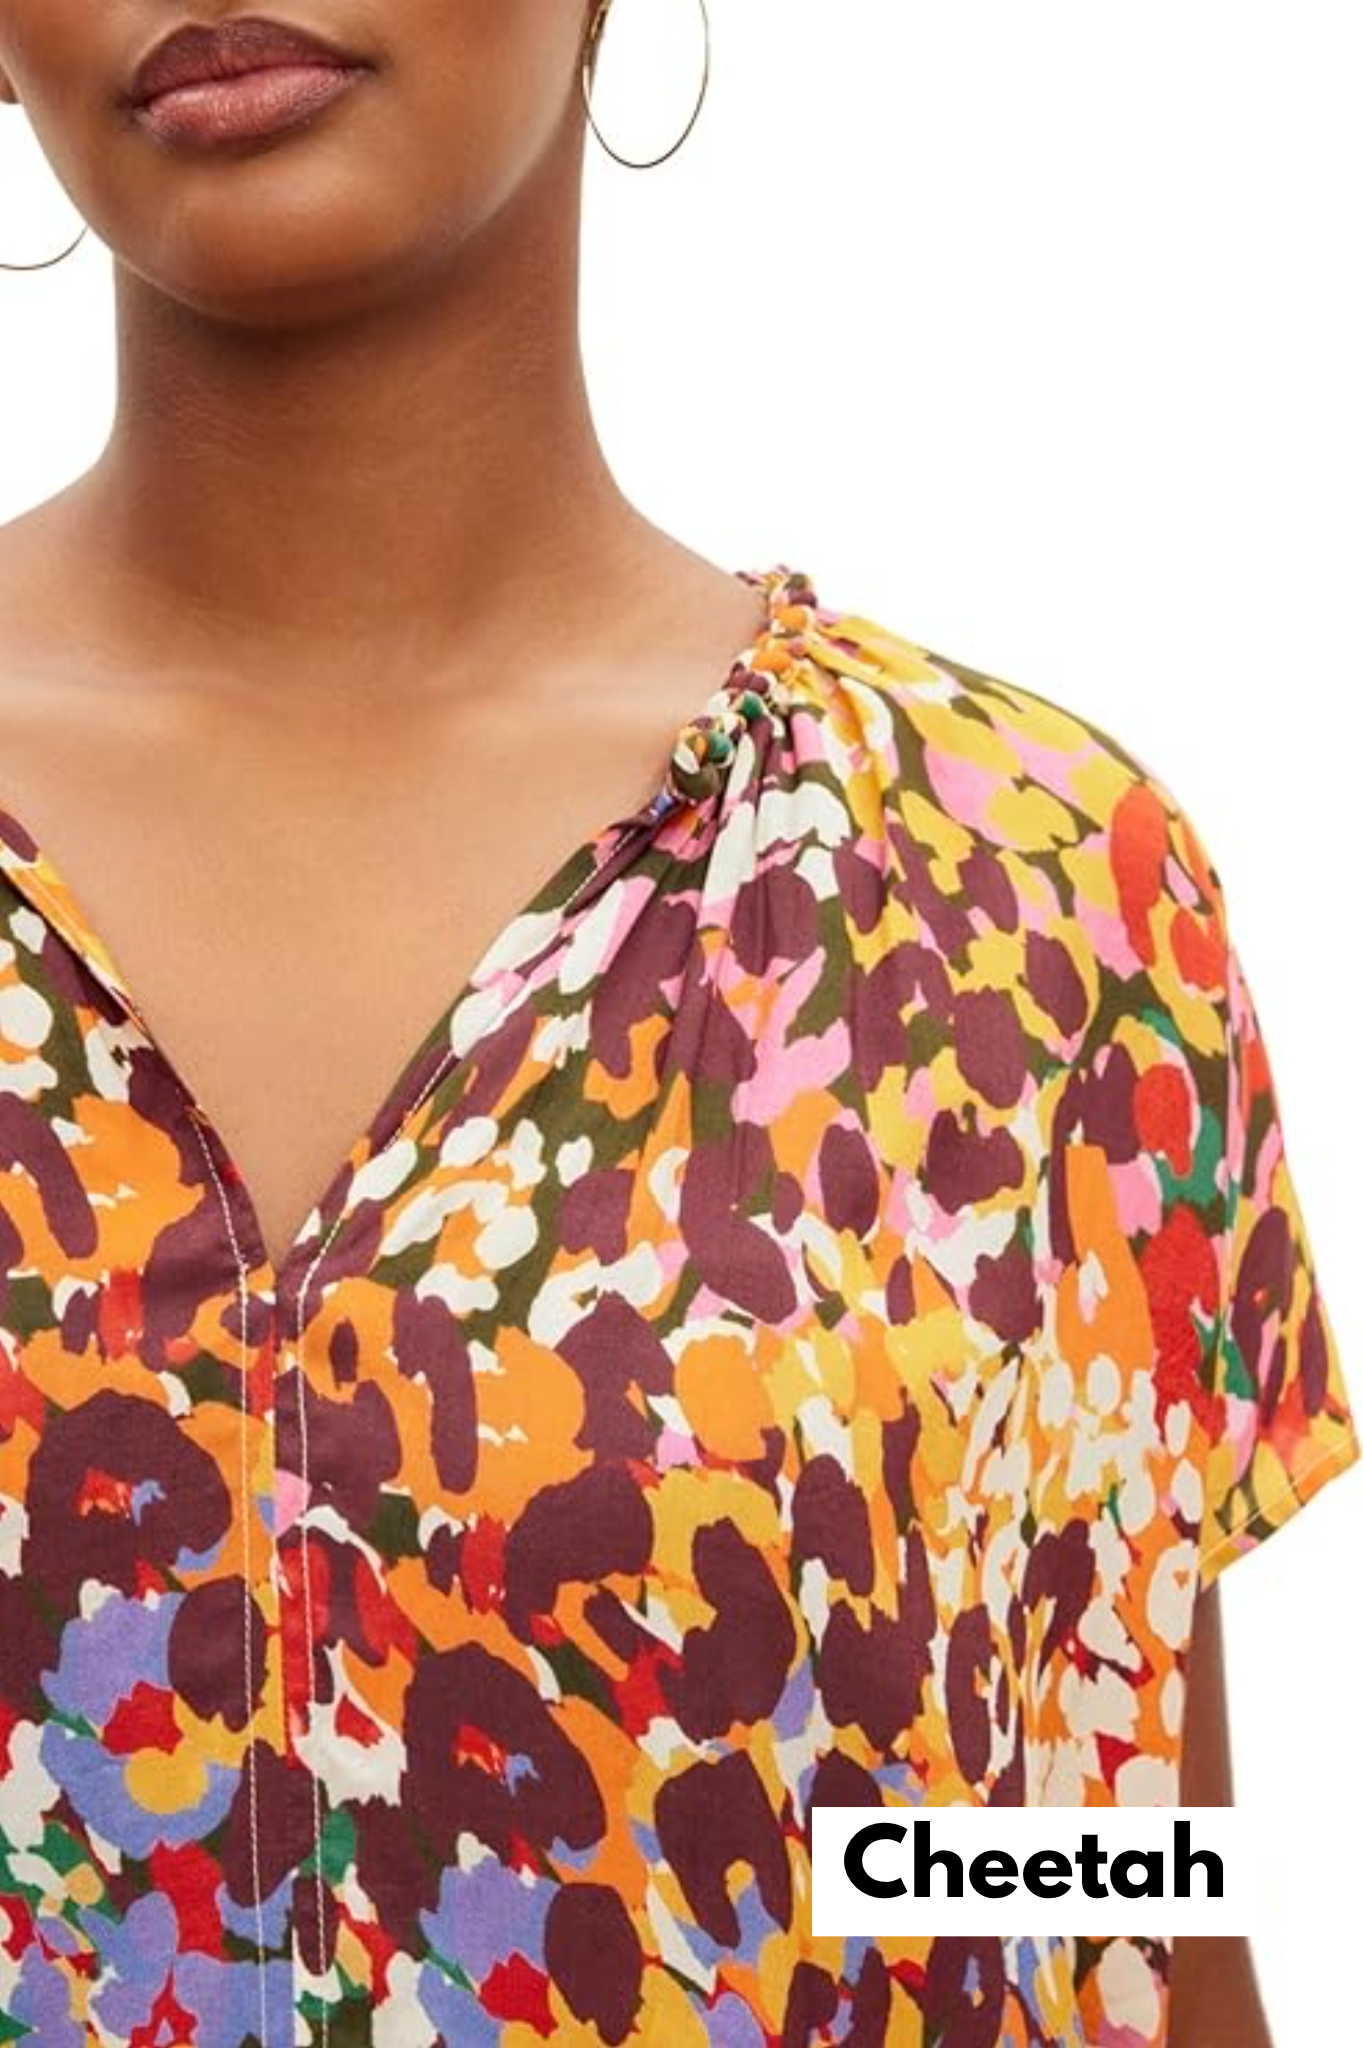 Velvet by Graham and Spencer Top in 2 Prints